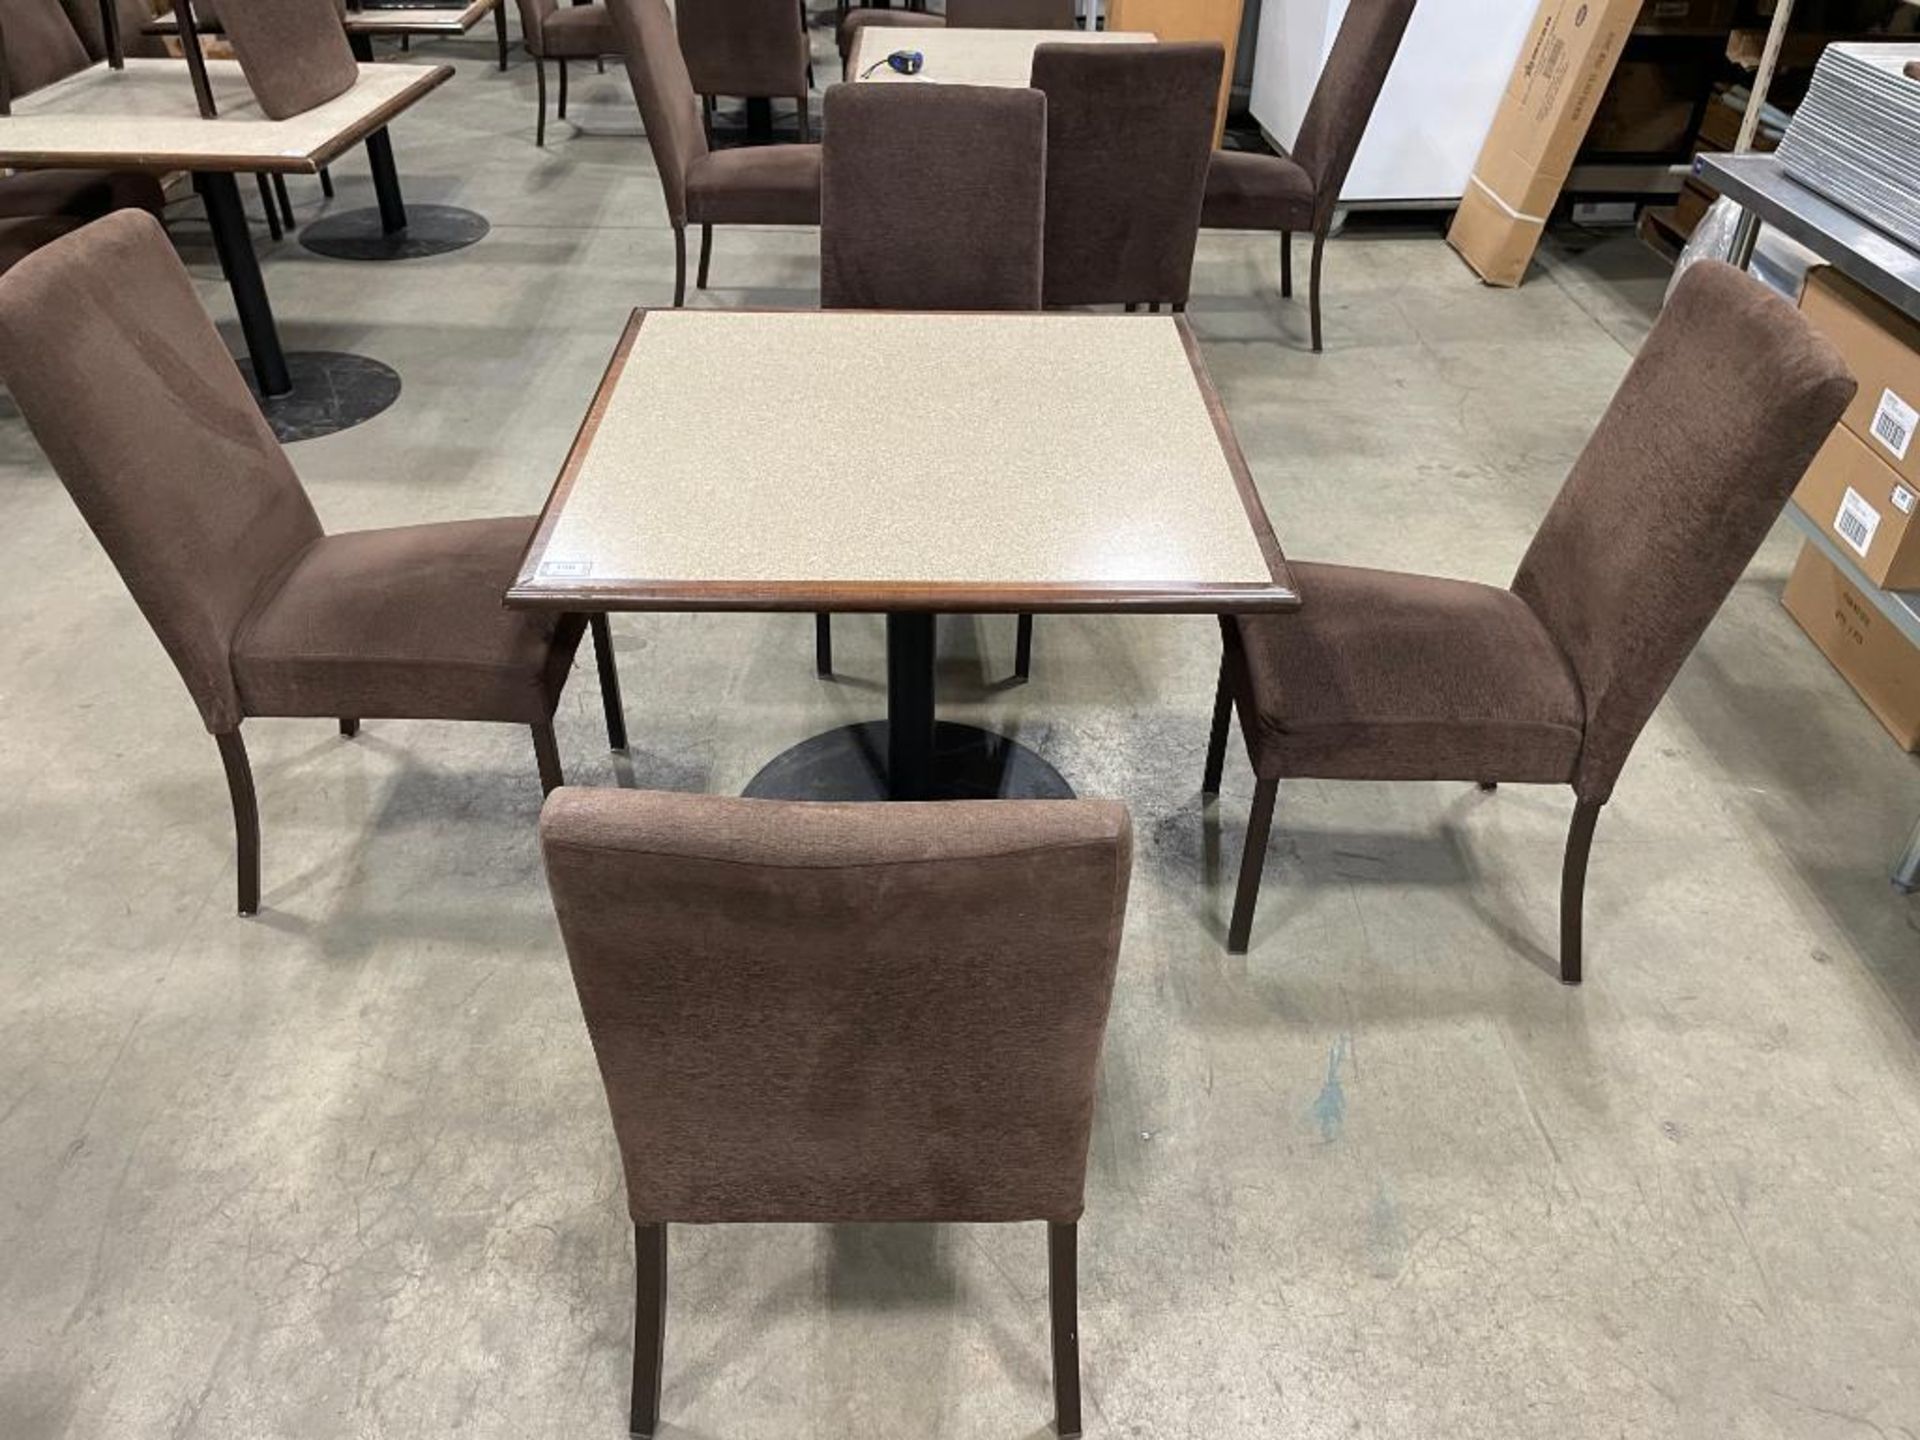 36" X 36" DINING TABLE WITH (4) MTS KILO DINING CHAIRS